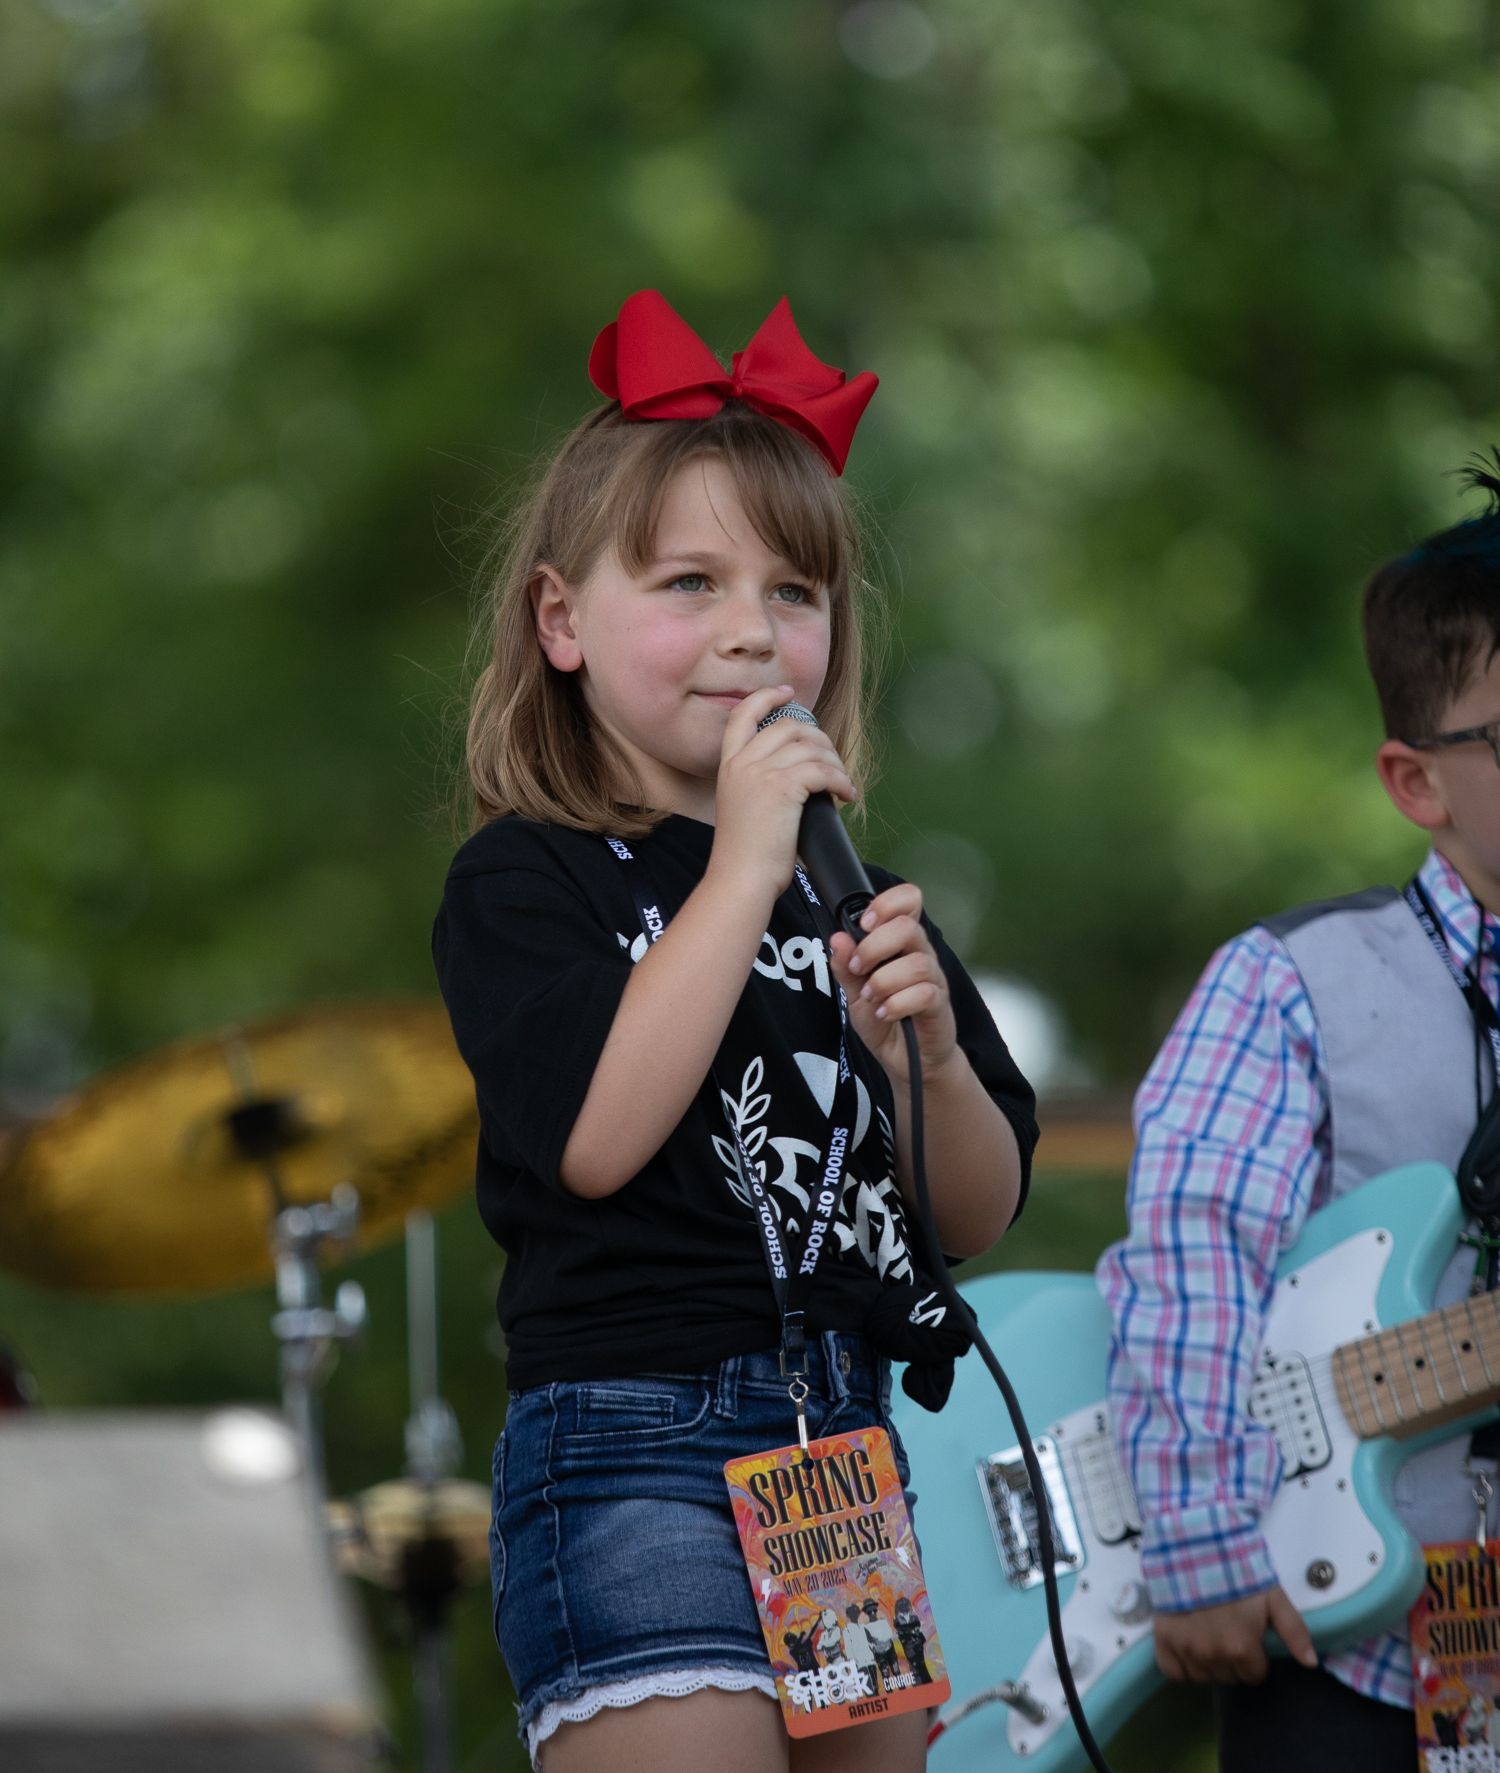 Rookies+ is a unique opportunity for our Rockstars age 5-7 to take to the stage! In this program, we combine private lessons with a 1-hour band practice